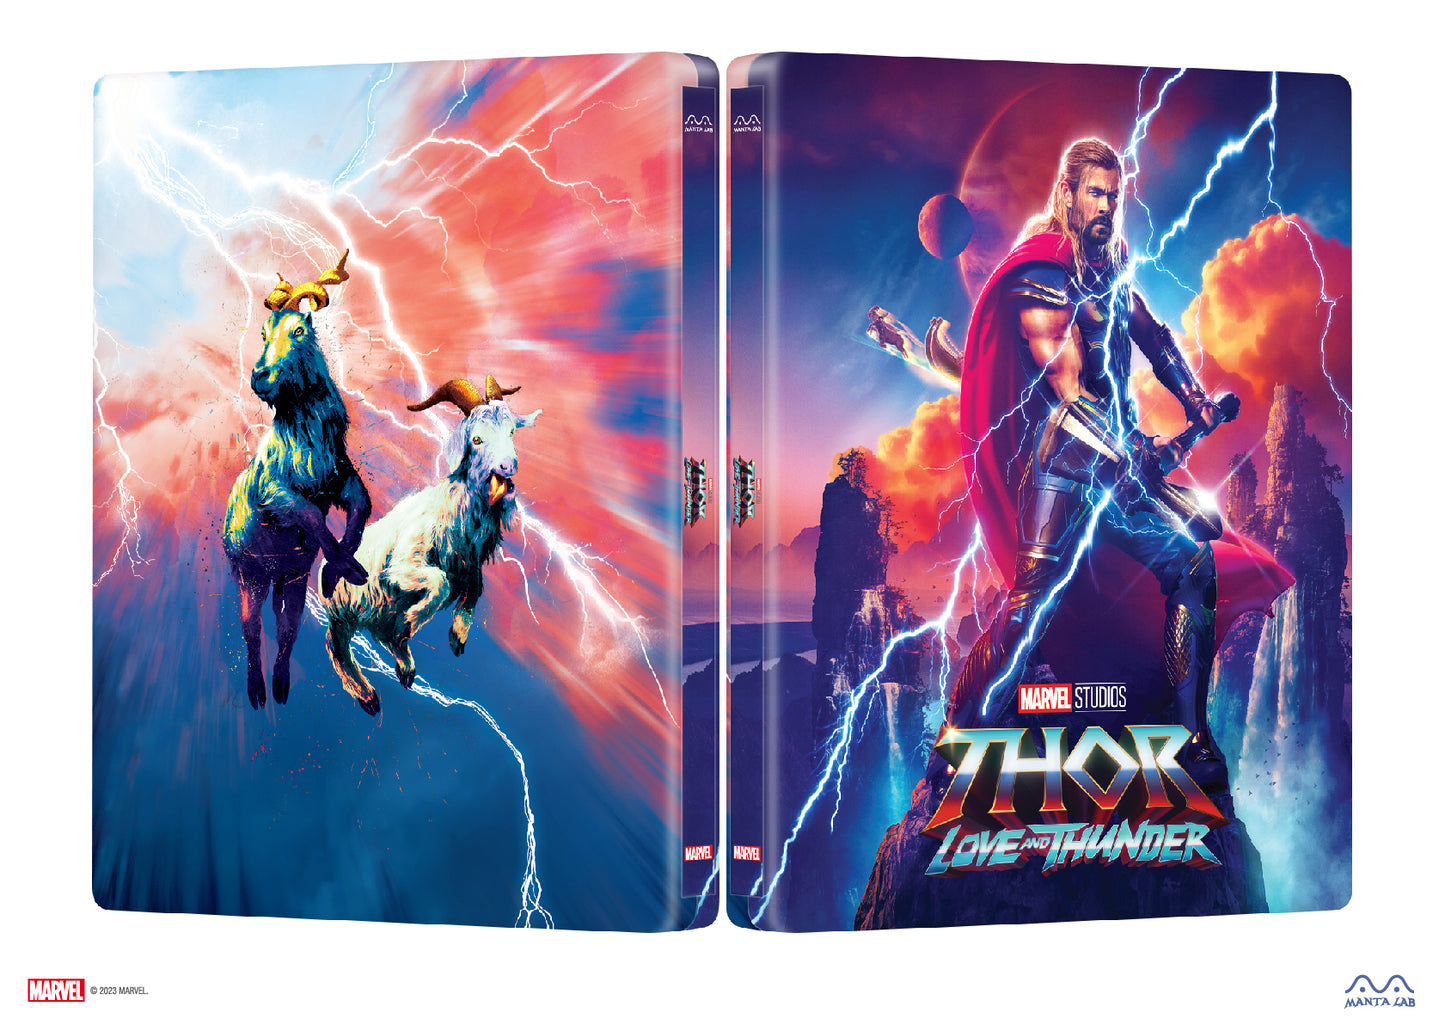 Thor: Love and Thunder Steelbook (Discless) Steelbook Manta Lab Exclusive MCP#-005 HDN GB Pre-Order Lenticular Slip